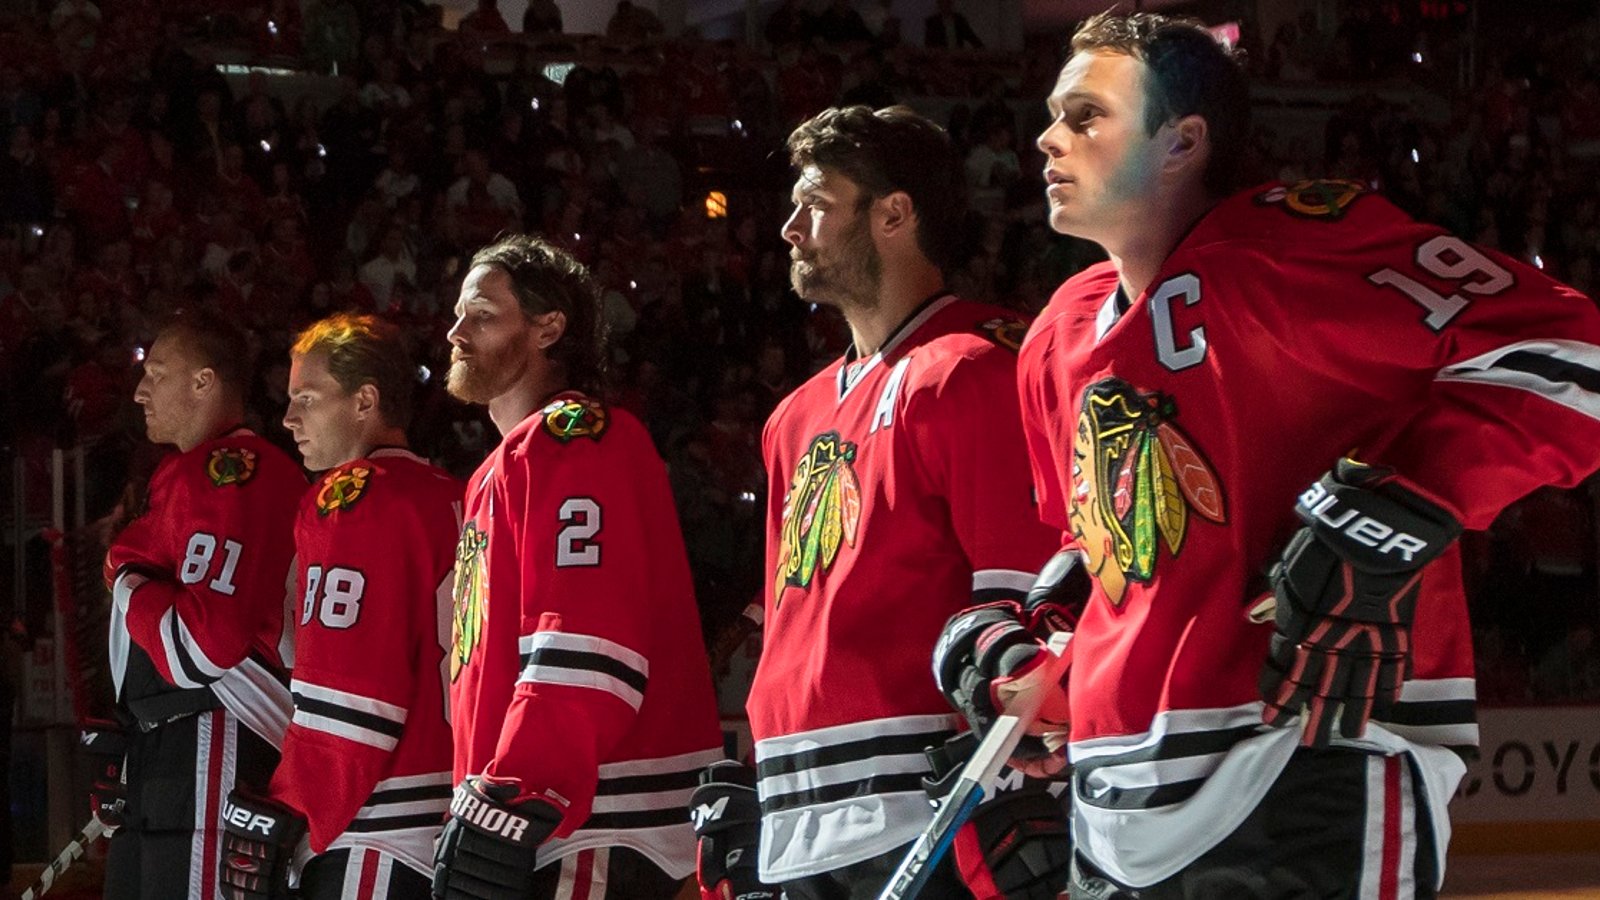 Report: Blackhawks lose another star player to injury.